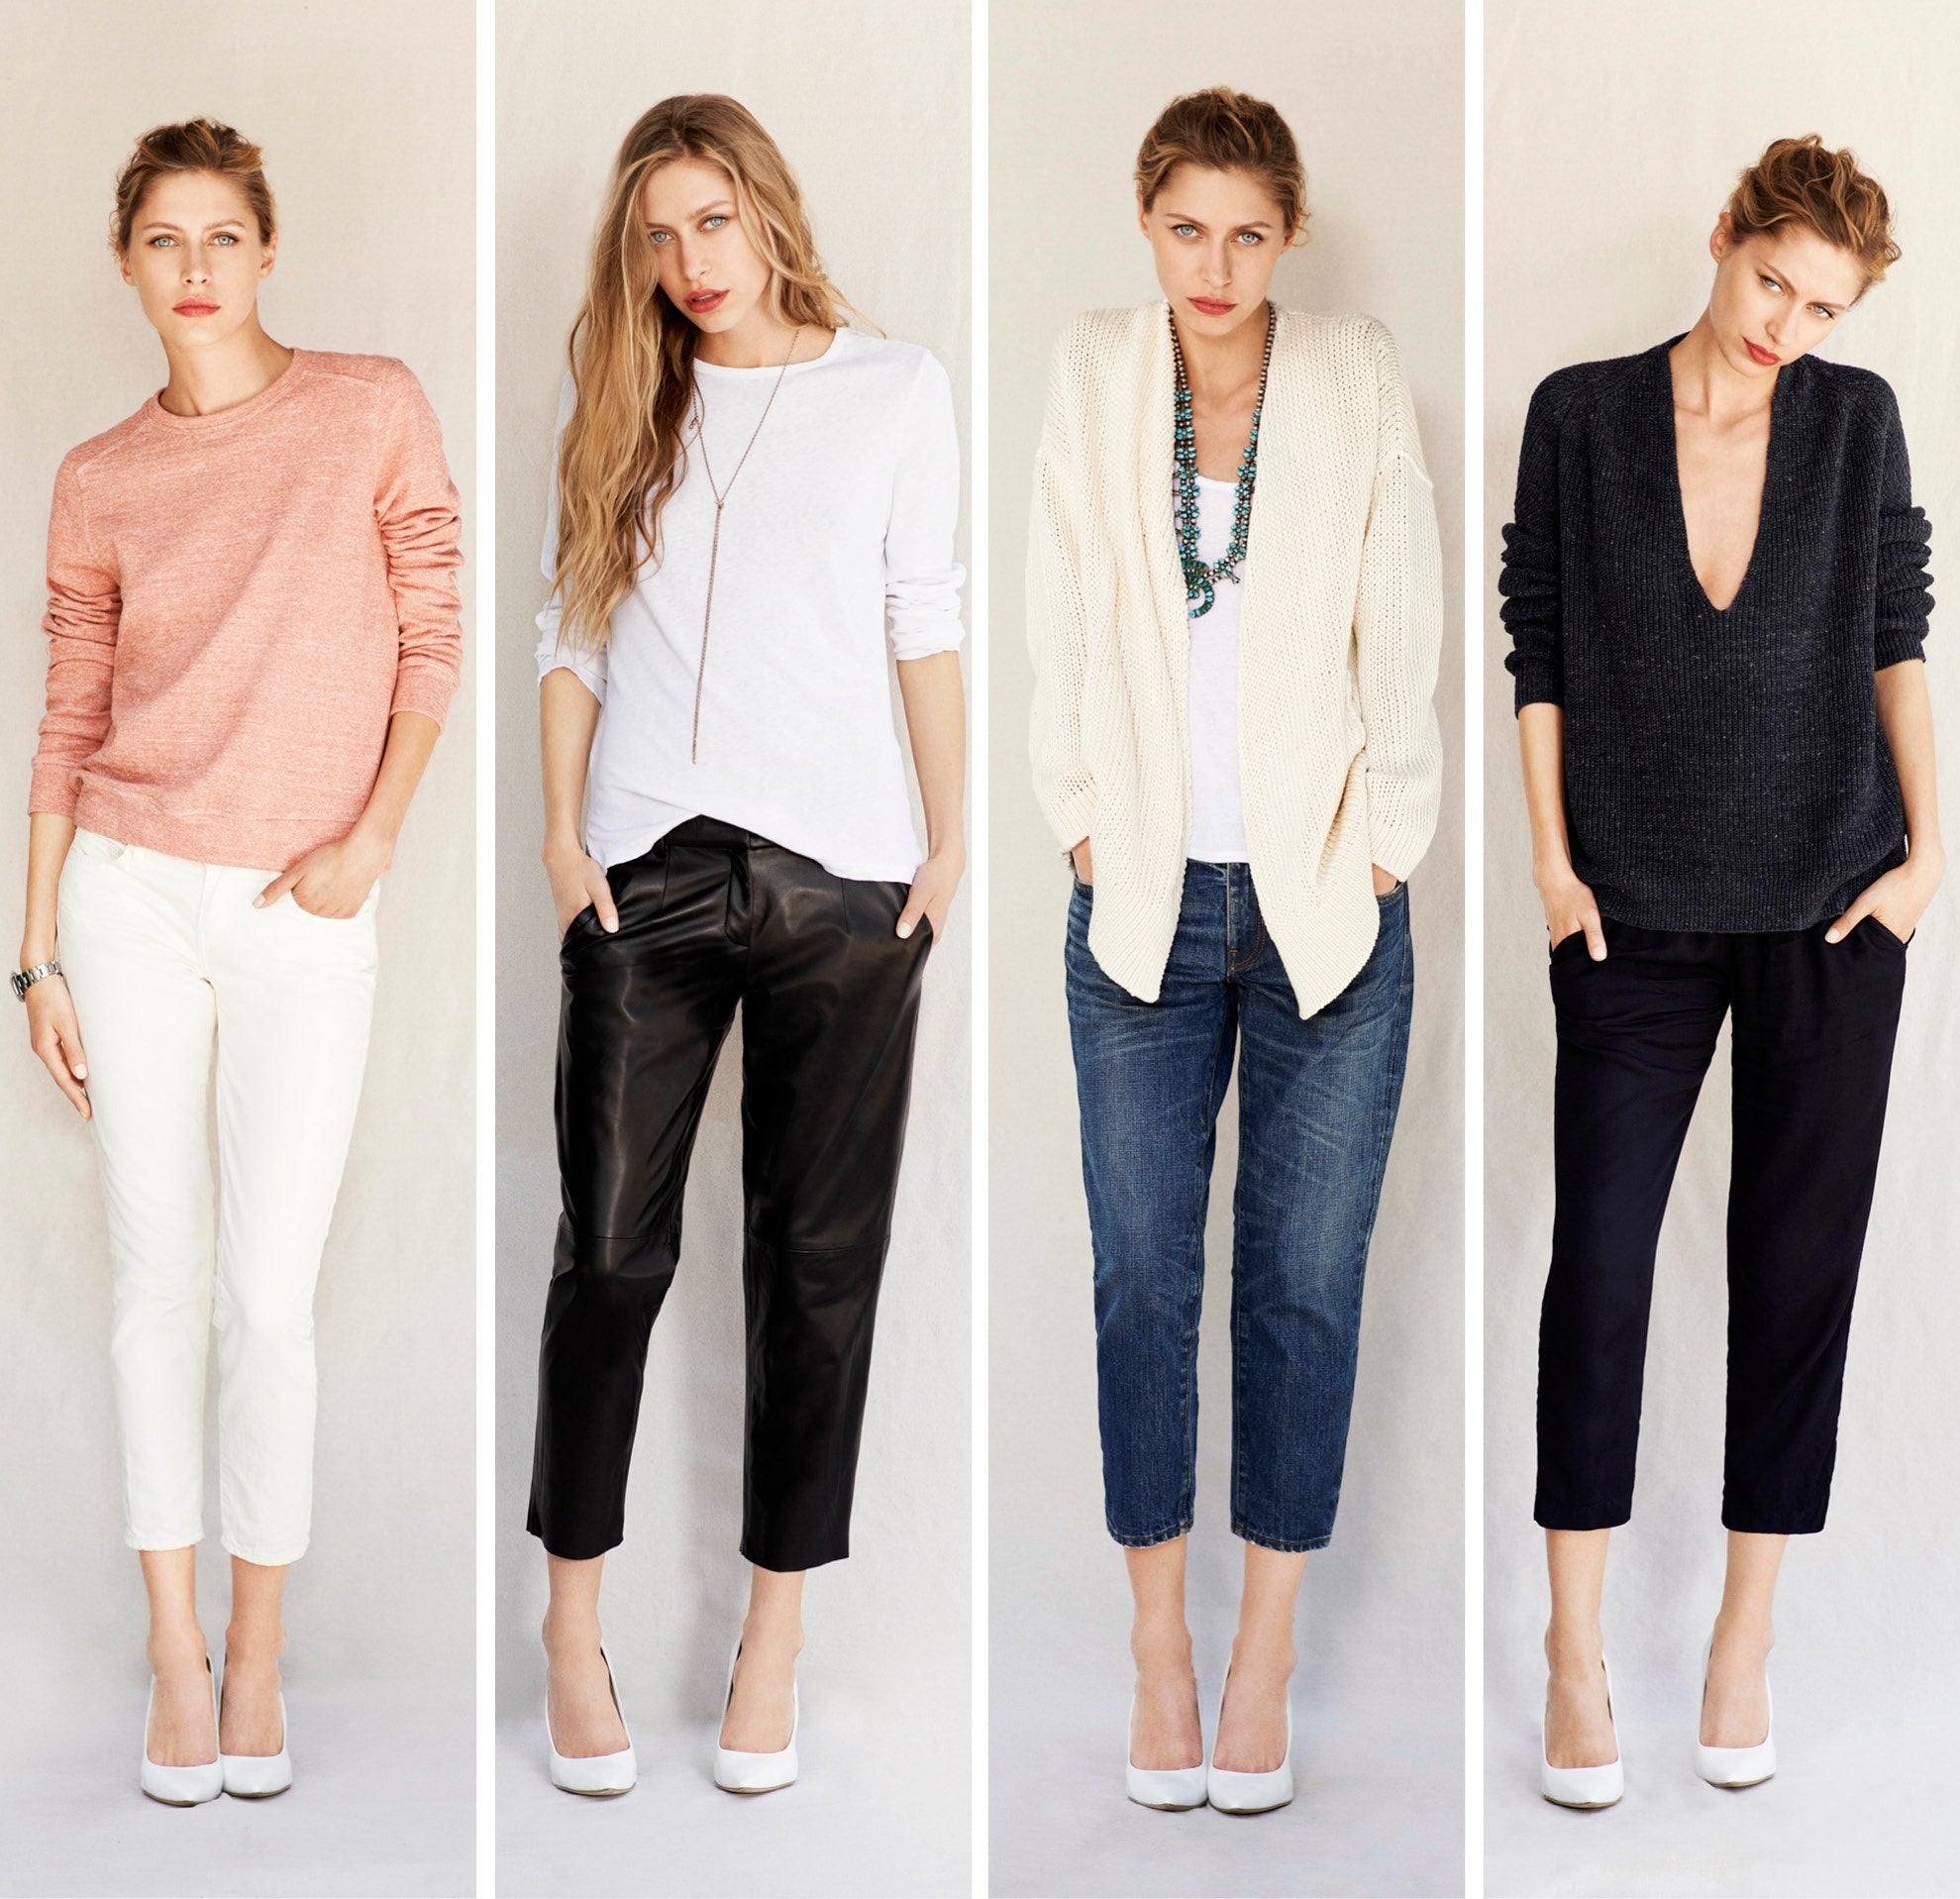 What Top To Wear With Cropped Pants? – solowomen